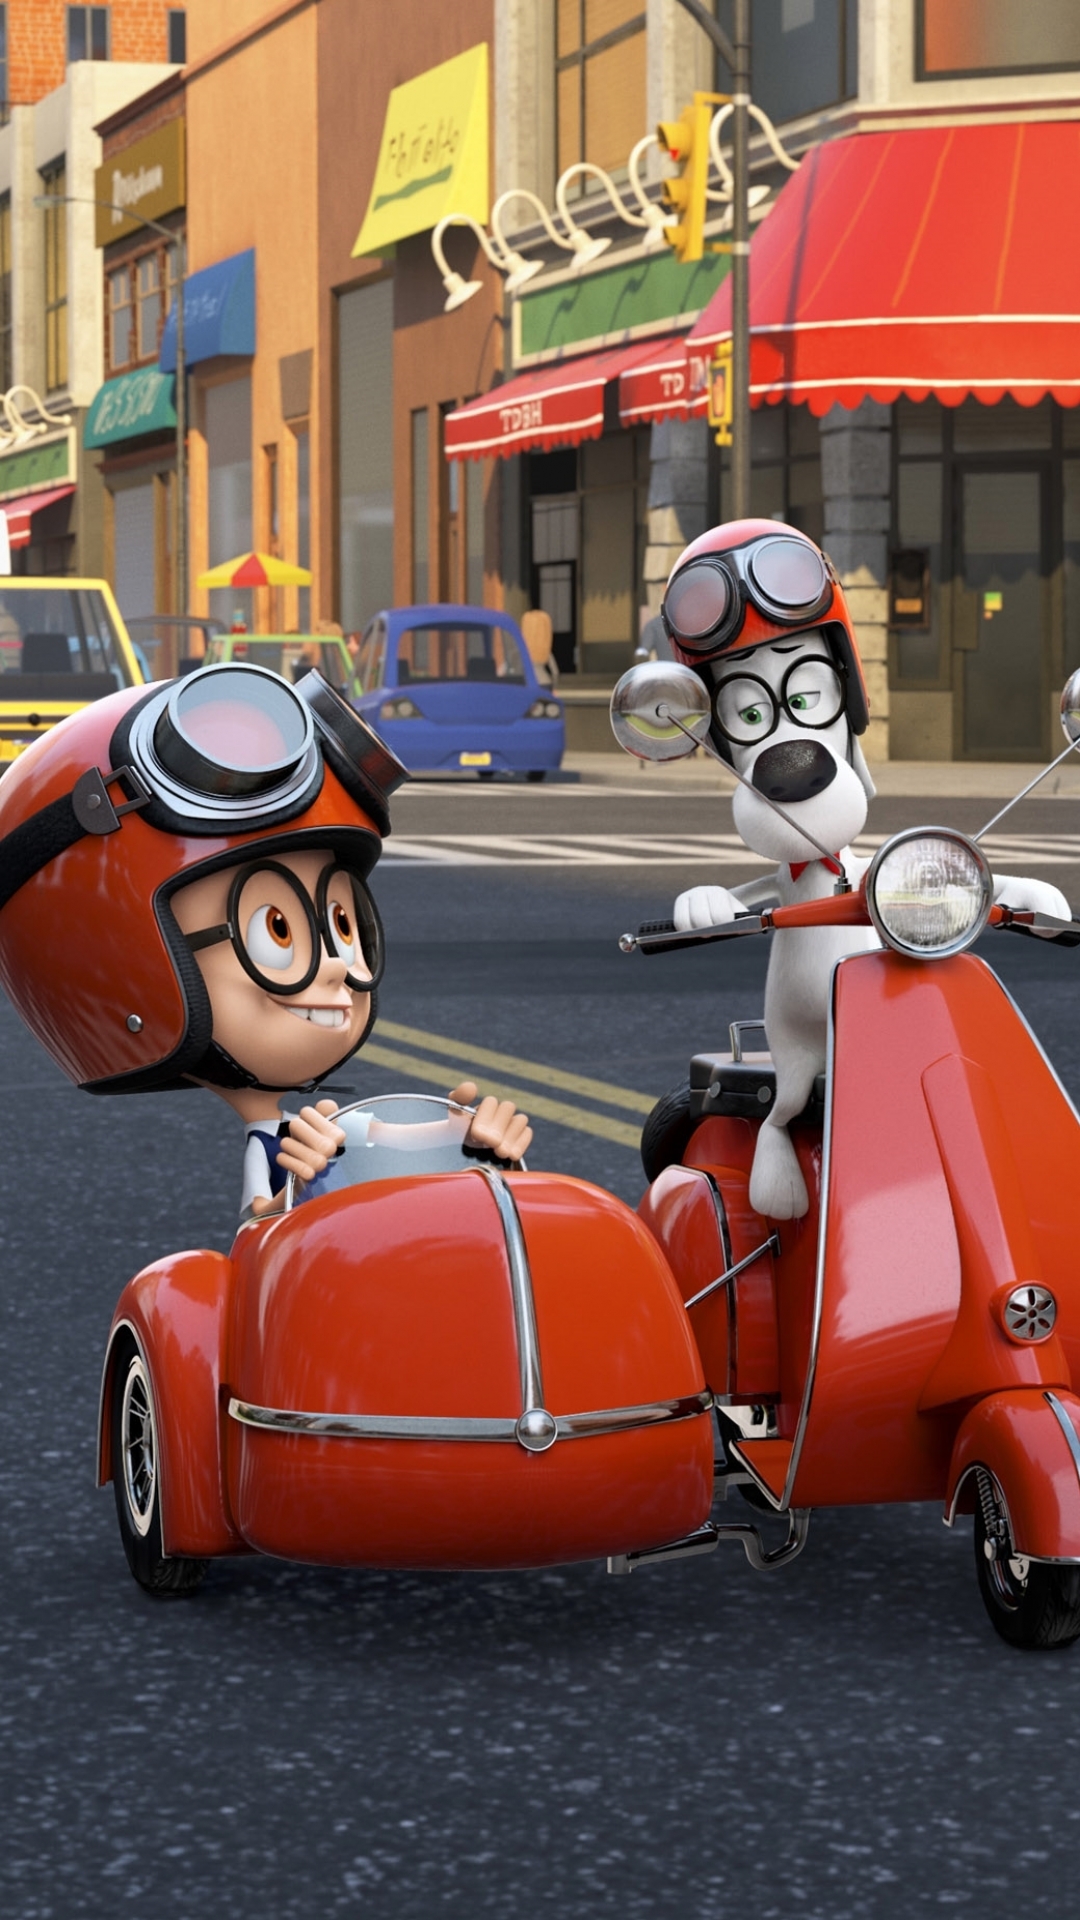 Images of Mr. Peabody & Sherman | 1080x1920